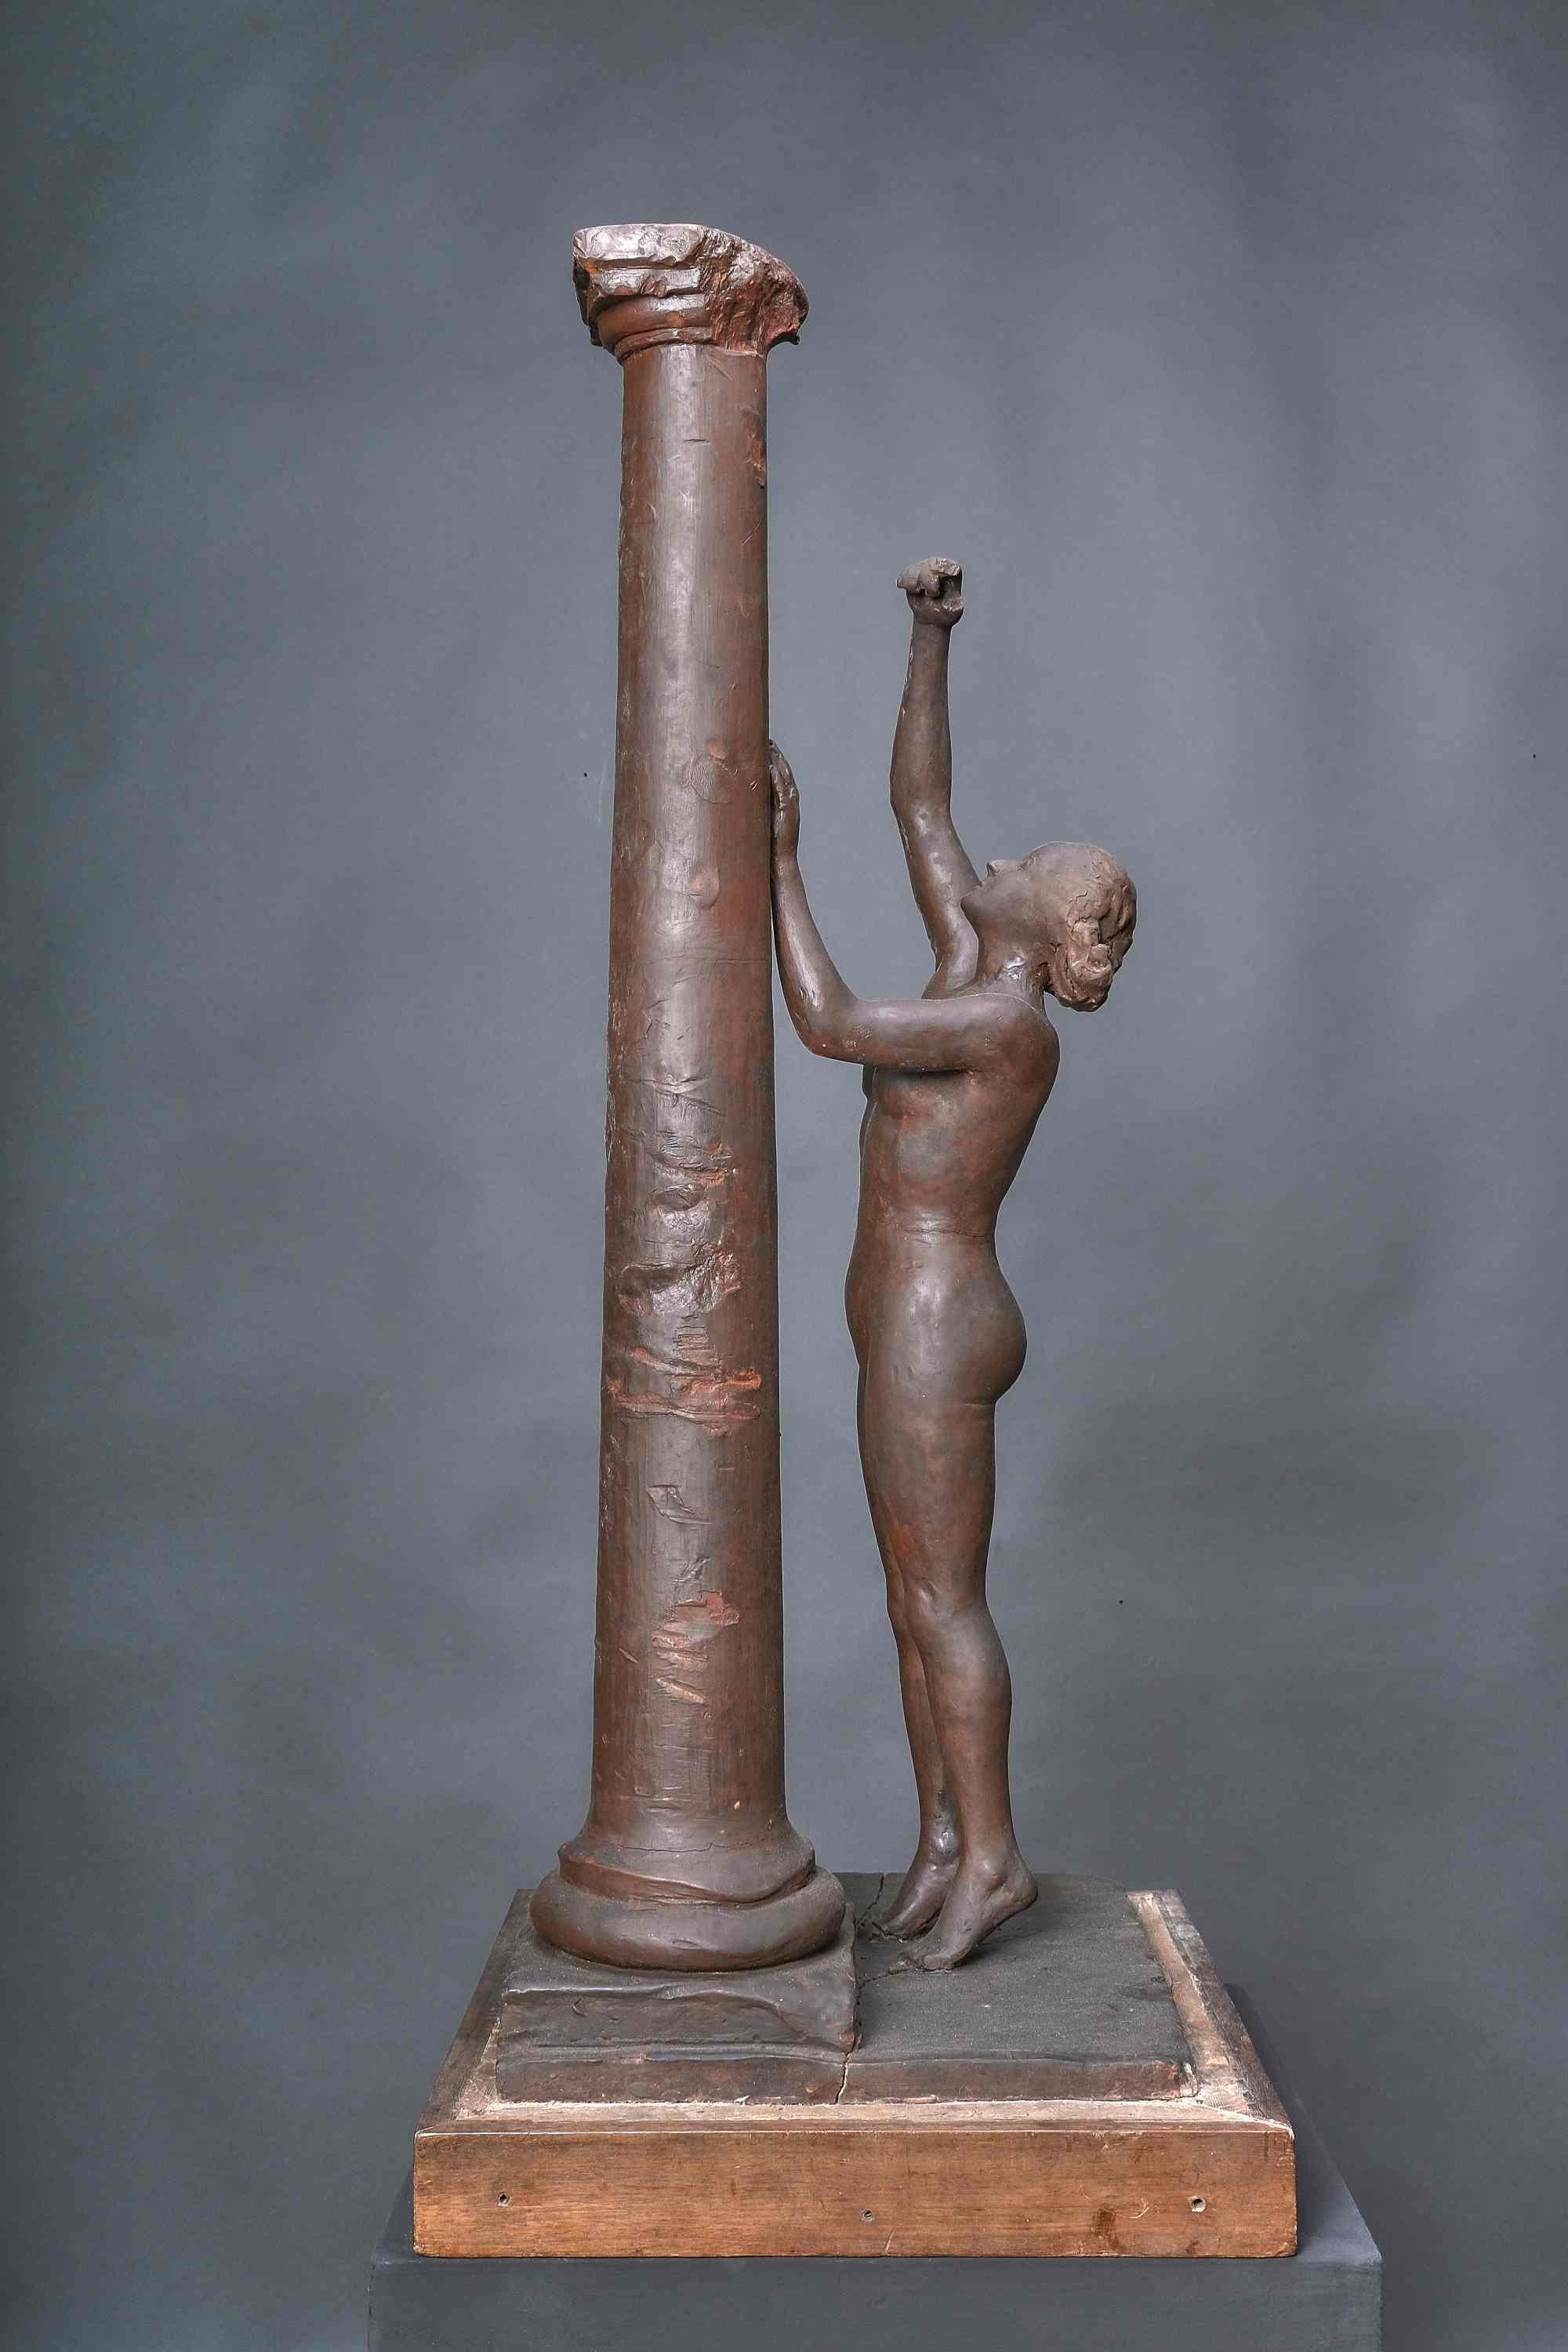 The wax figure represents the study of a naked woman who stretches herself in height along a column. She stands on her tiptoes and leans her left hand against a column. She stretches her right arm up above her head. Very realistic statue, which